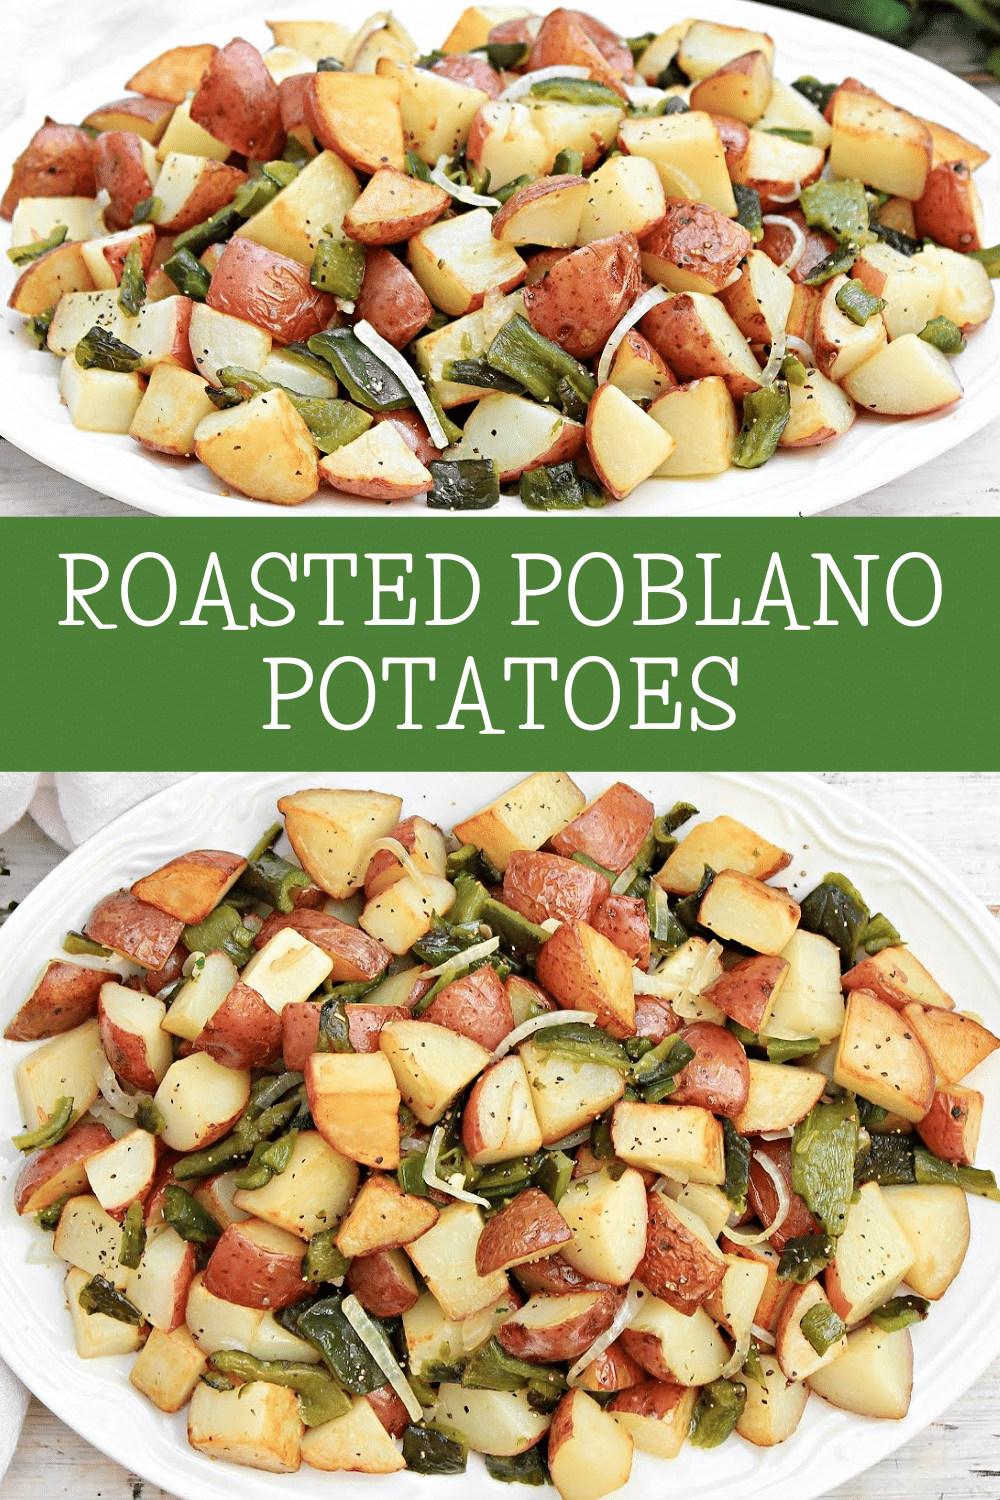 Poblano Potatoes ~ Papas con Rajas Recipe

Lightly crisp potatoes combined with the smoky, mild heat of roasted poblano peppers. via @thiswifecooks